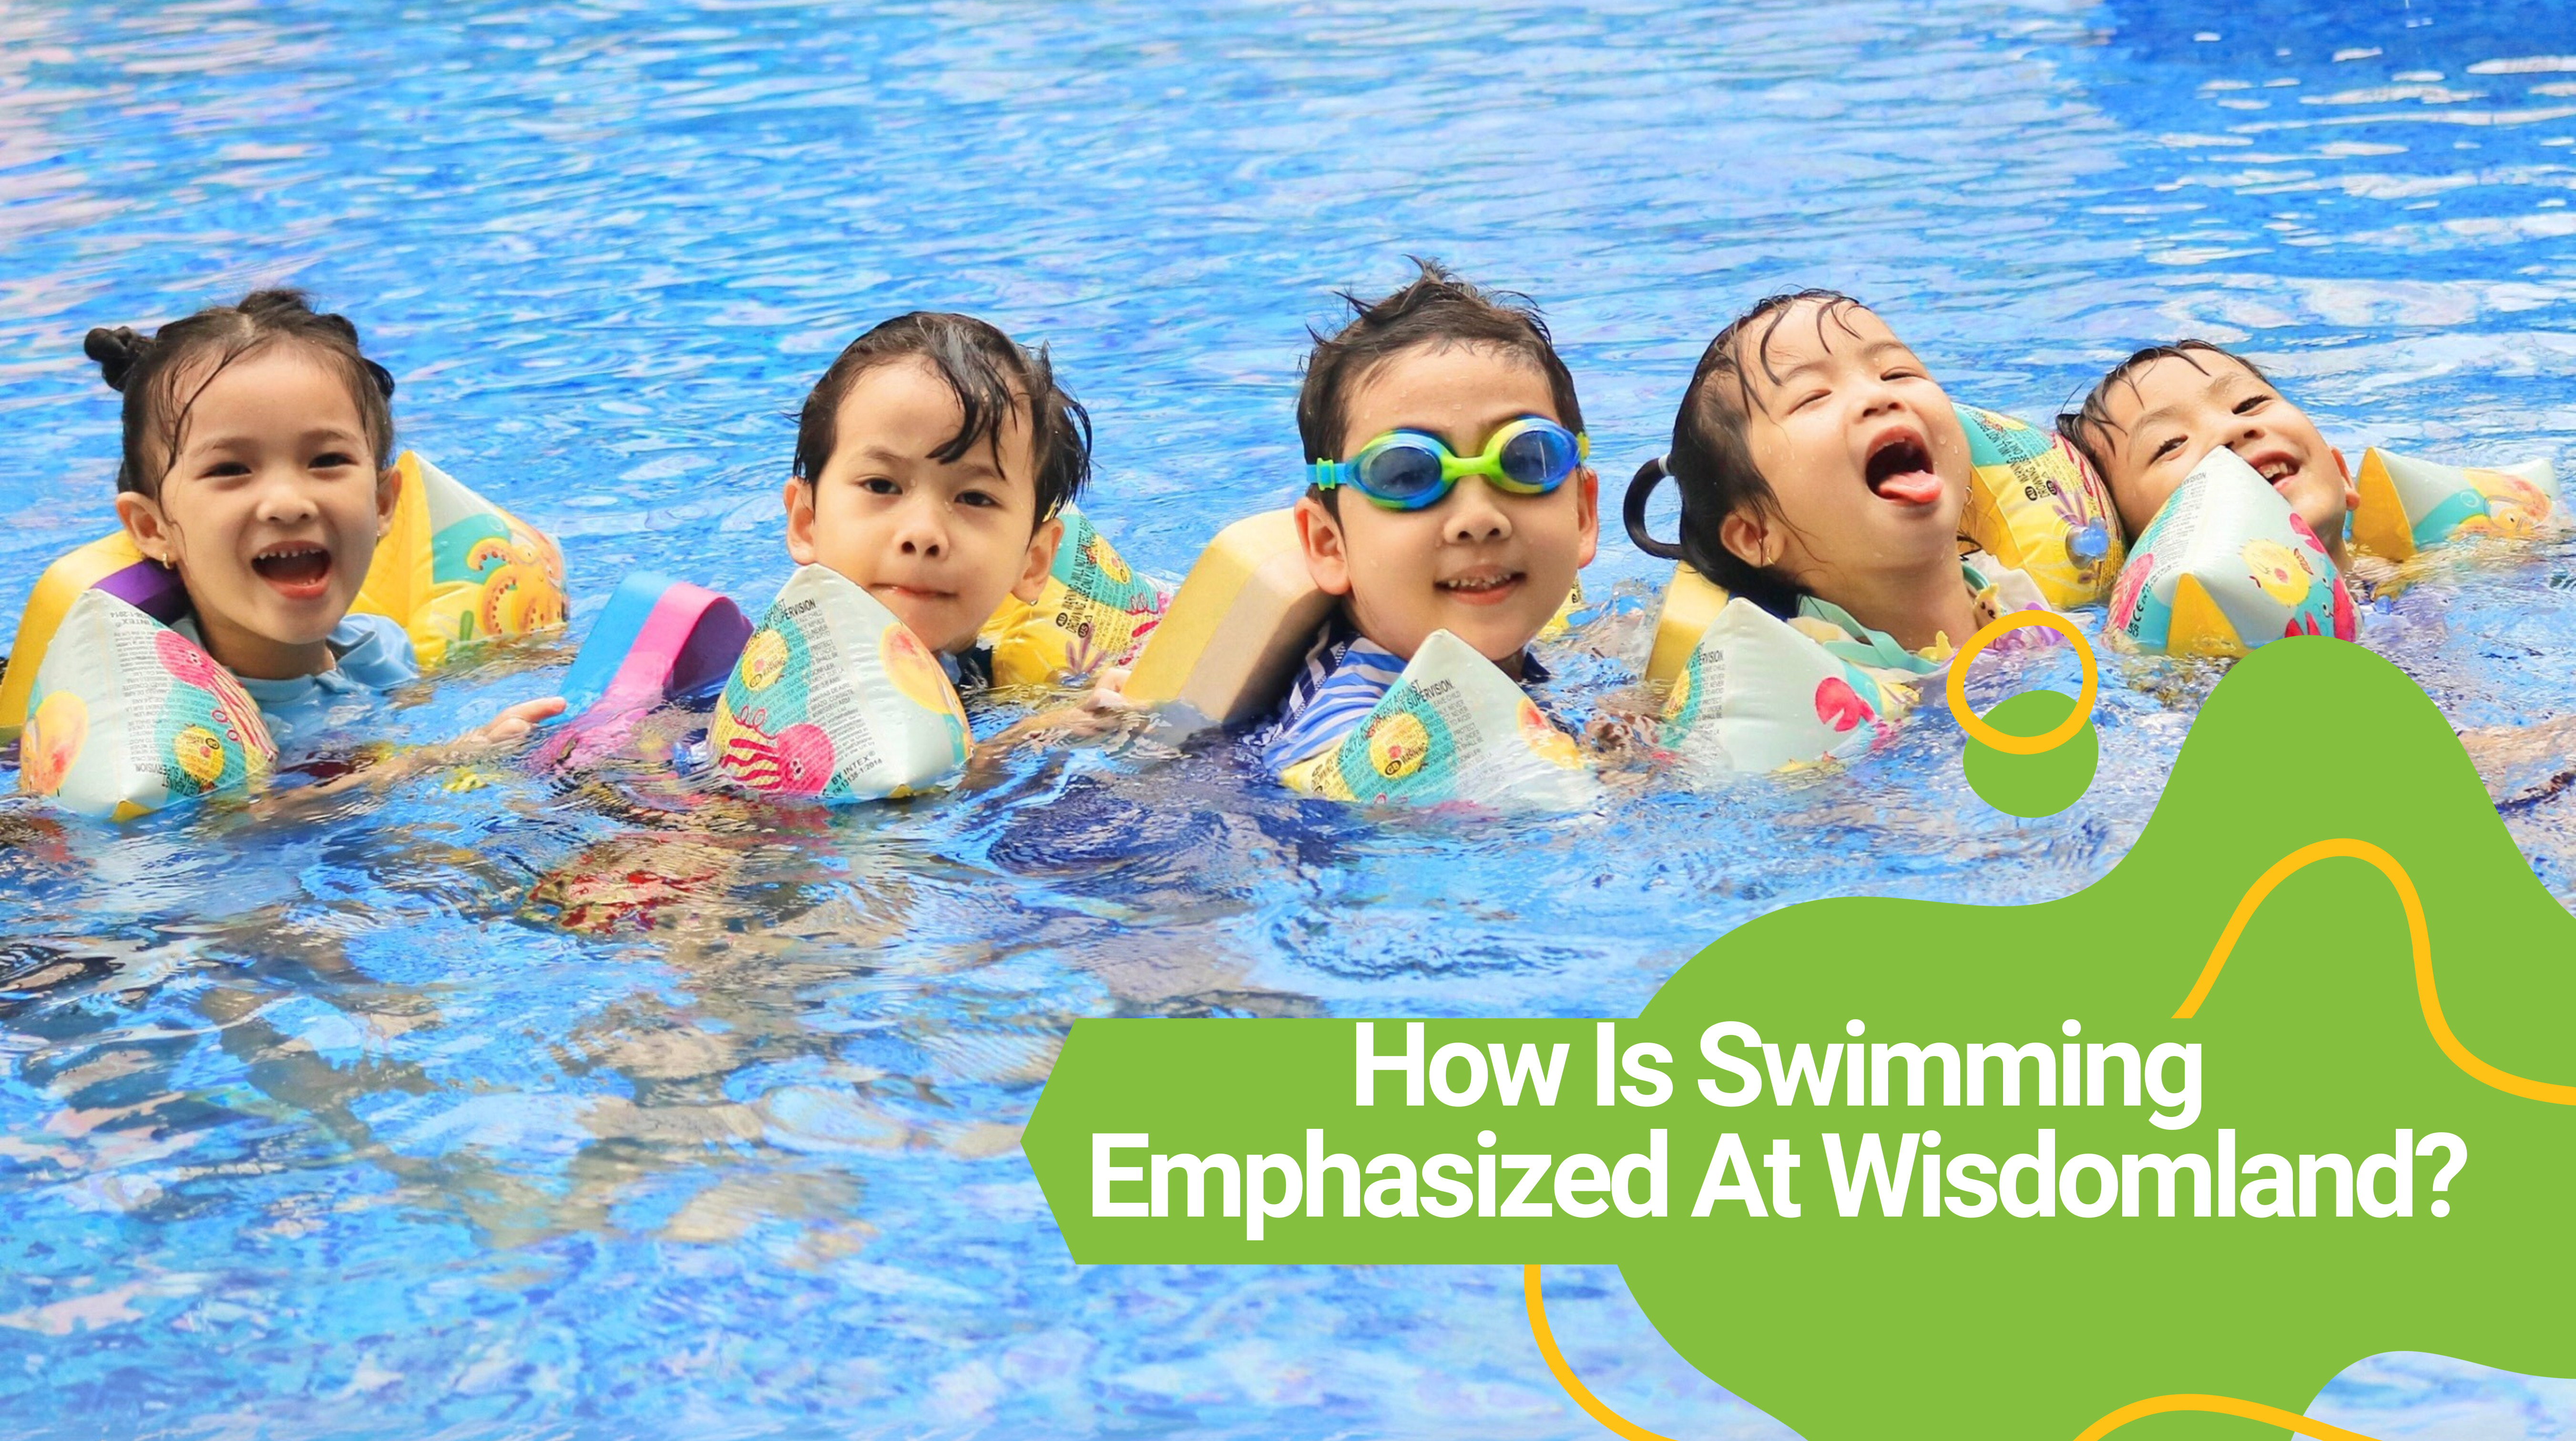 How Is Swimming Emphasized At Wisdomland?